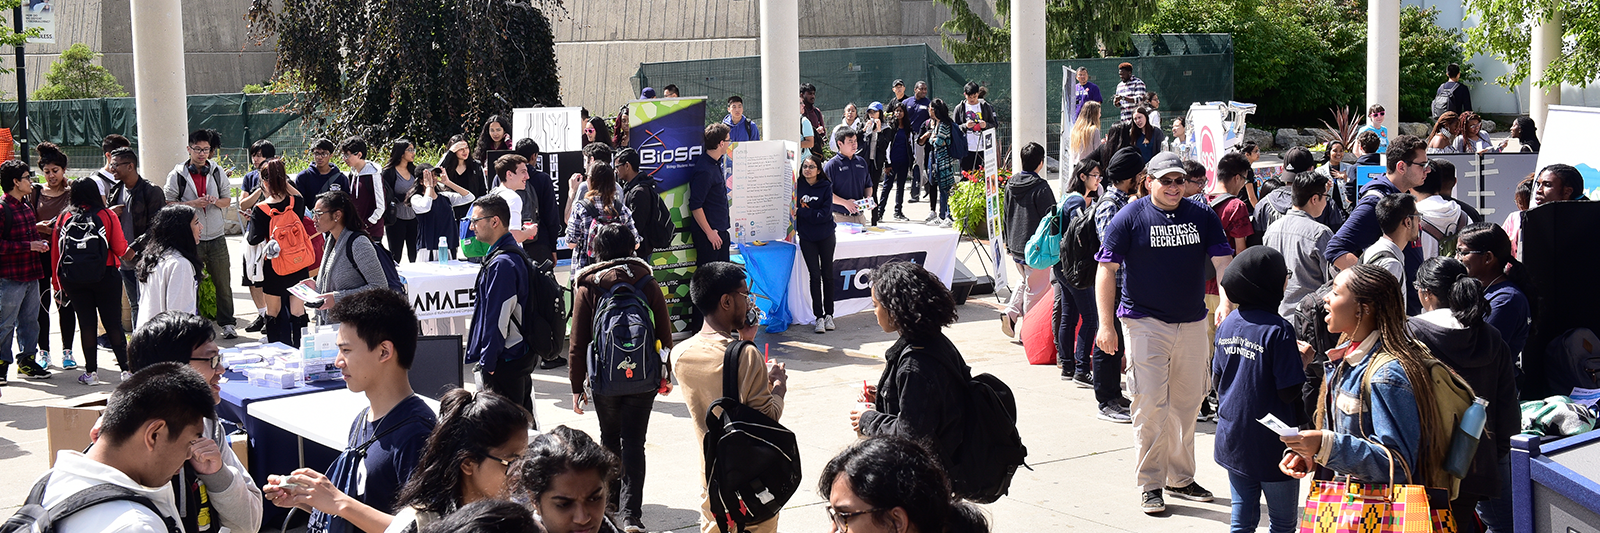 Large crowd of U of T Scarborough students at an event